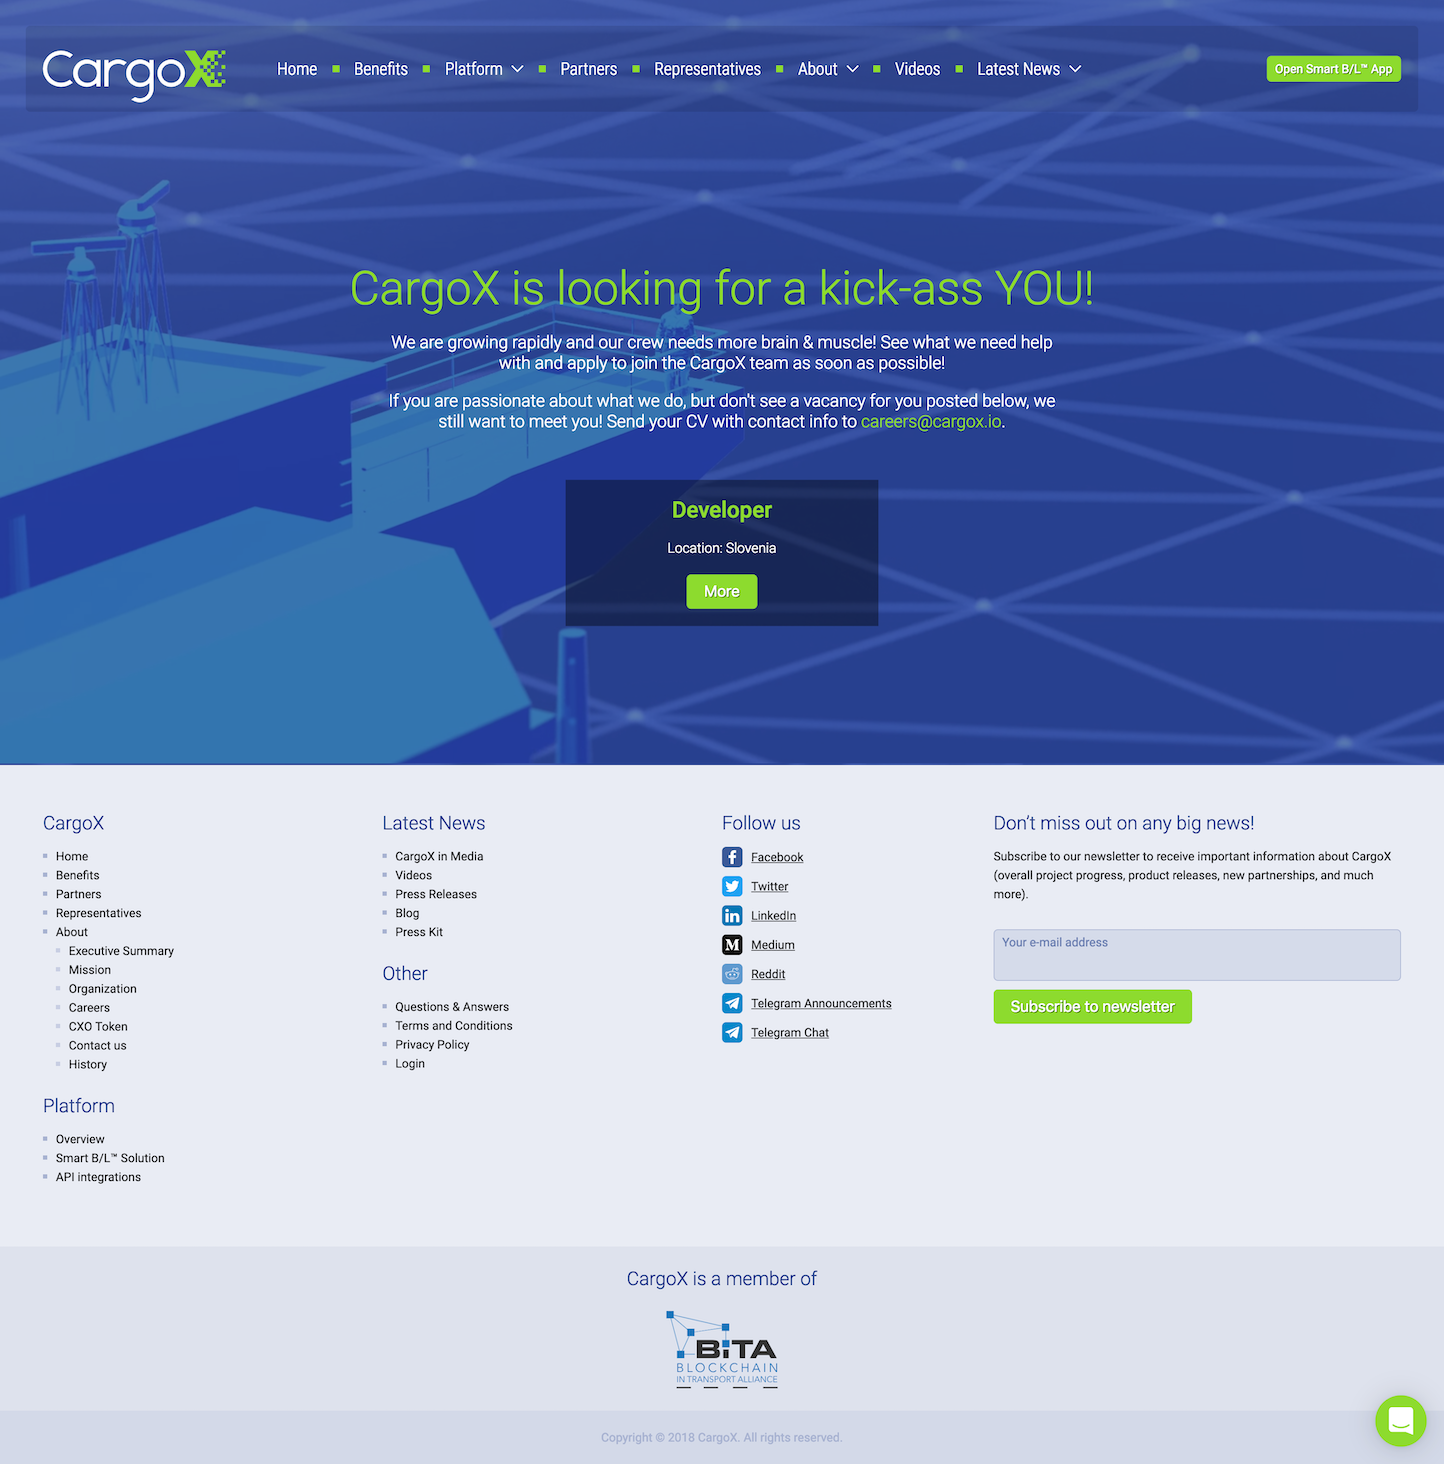 Screenshot of the Careers page from the CargoX website.